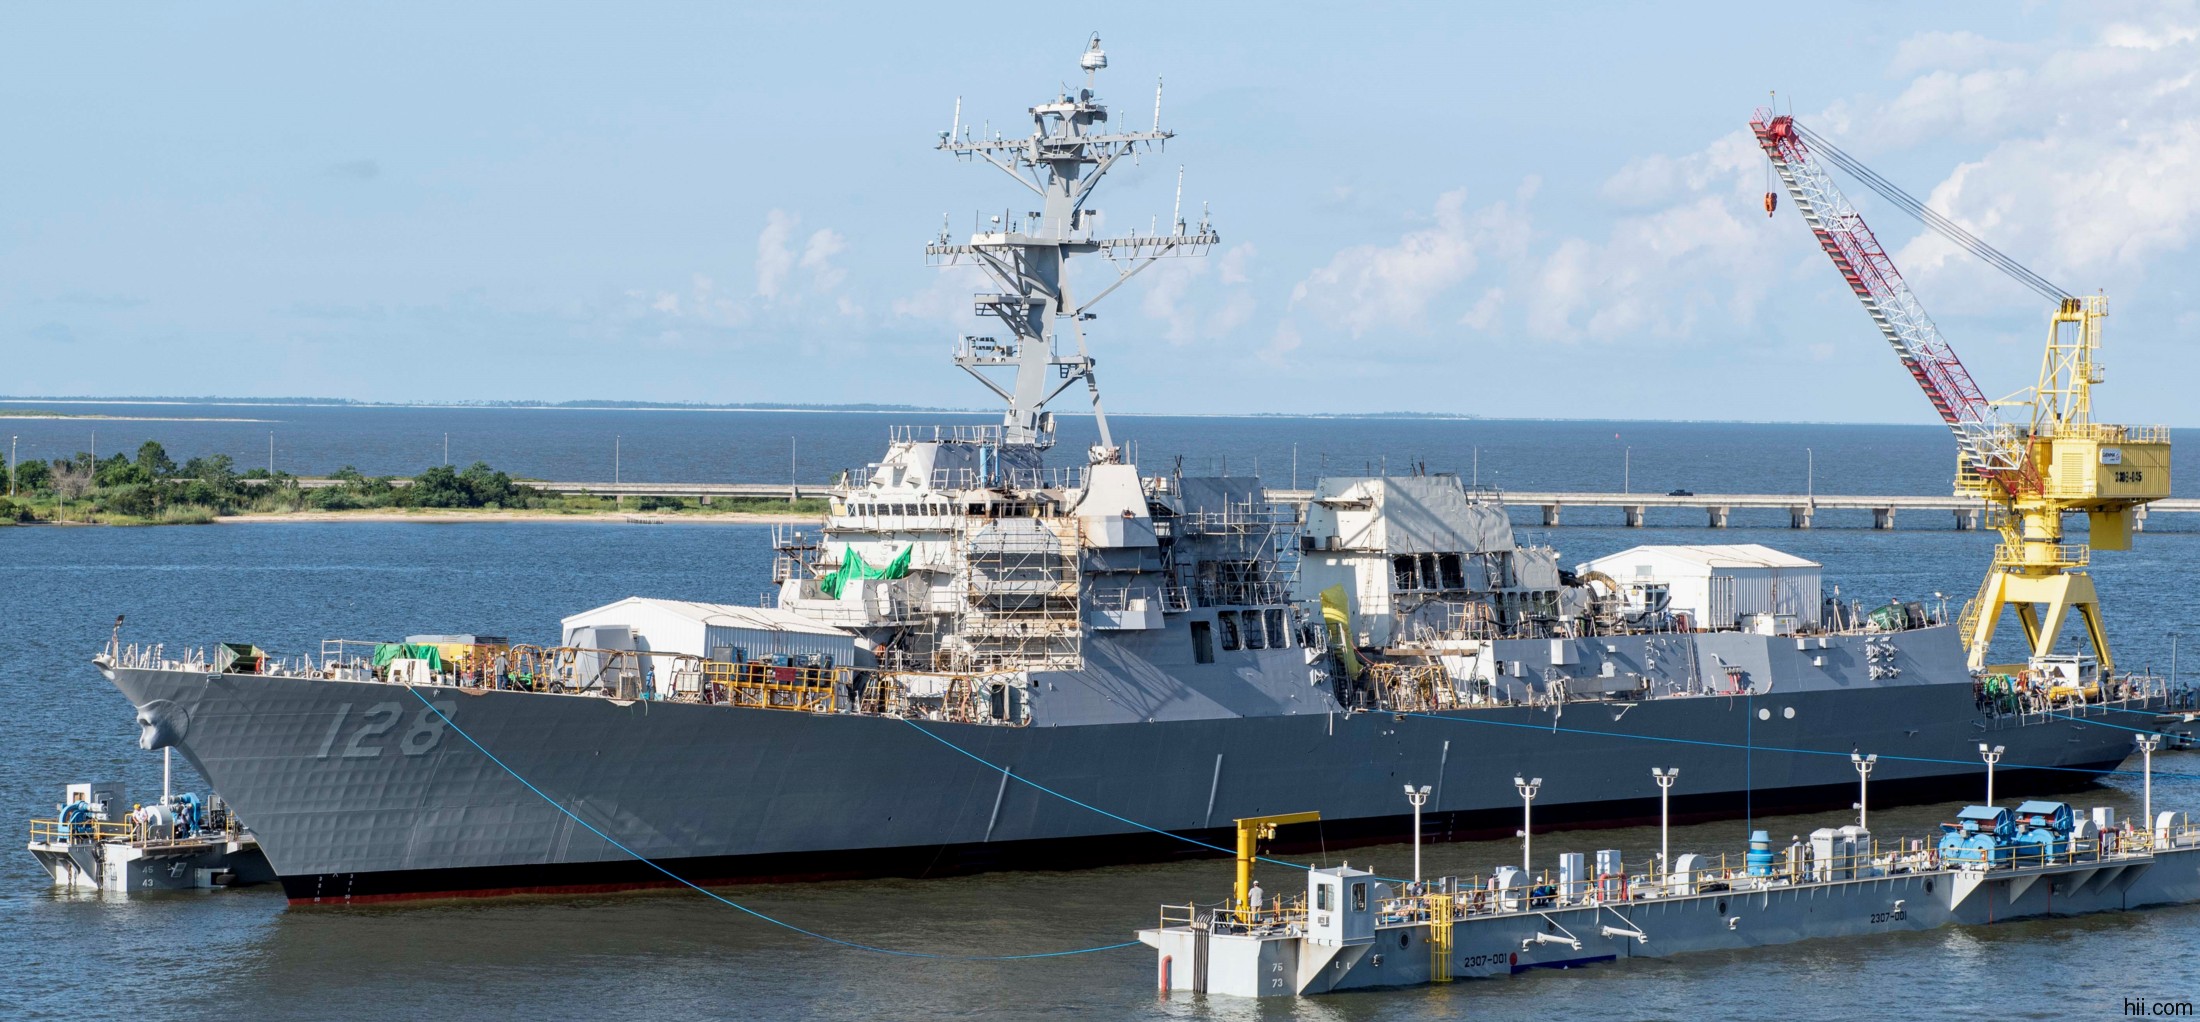 ddg-128 uss ted stevens arleigh burke class guided missile destroyer aegis us navy launching ingalls pascagoula 11